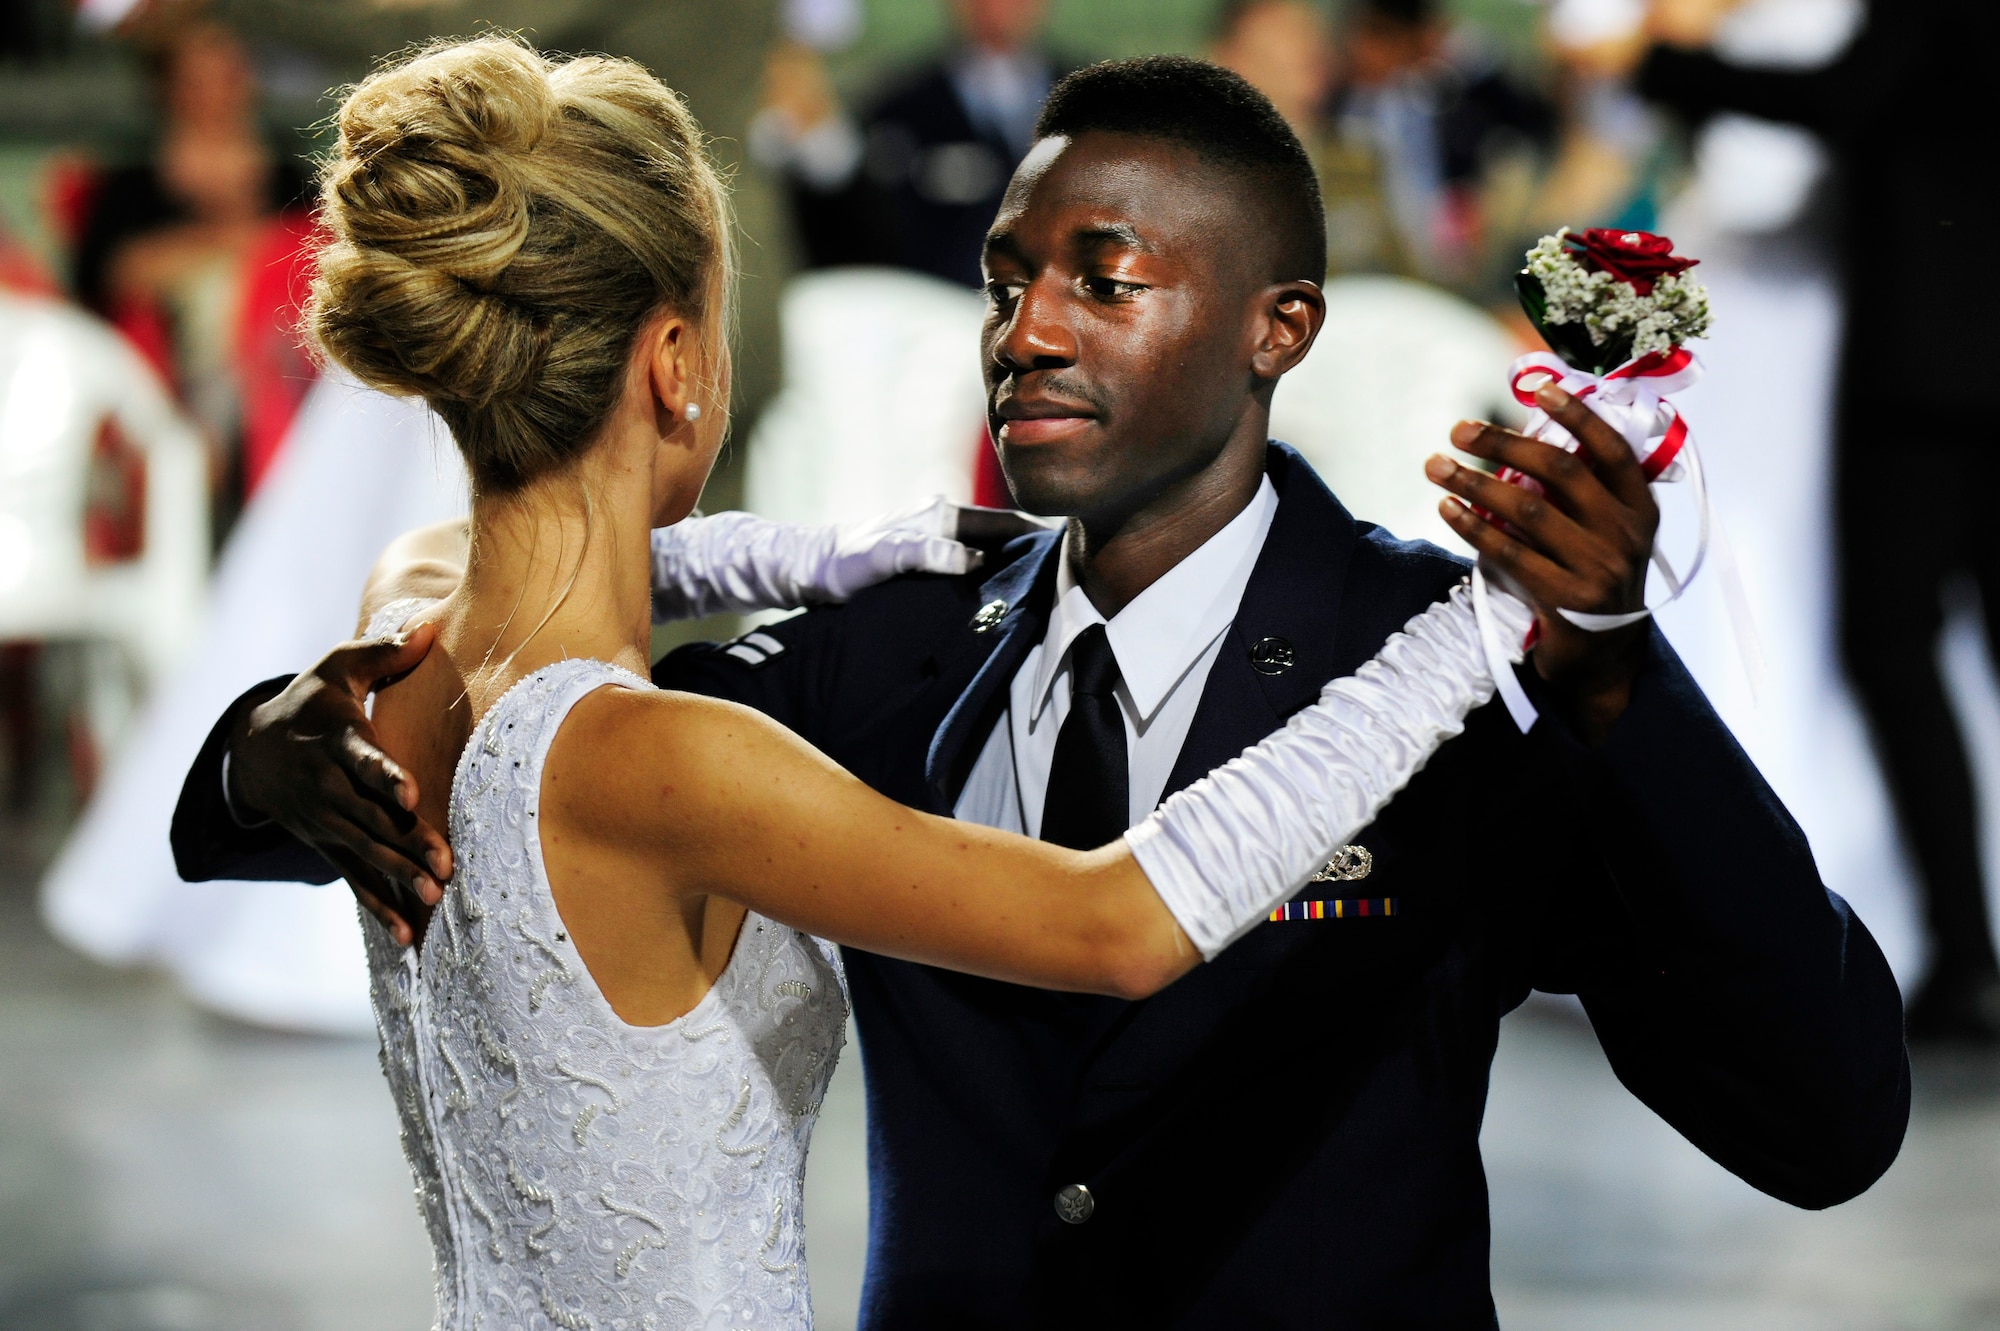 Airman 1st Class Jawanza Lynch, 31st Maintenance Squadron, performs the waltz with his partner, Cristina Marta, during the 16th Annual Debutant Ball in Cordenons, Italy, June 22, 2014. Airmen practiced for two to three hours, twice a week, for three months with their Italian partner leading up to the event. (U.S. Air Force photo/Airman 1st Class Ryan Conroy) 